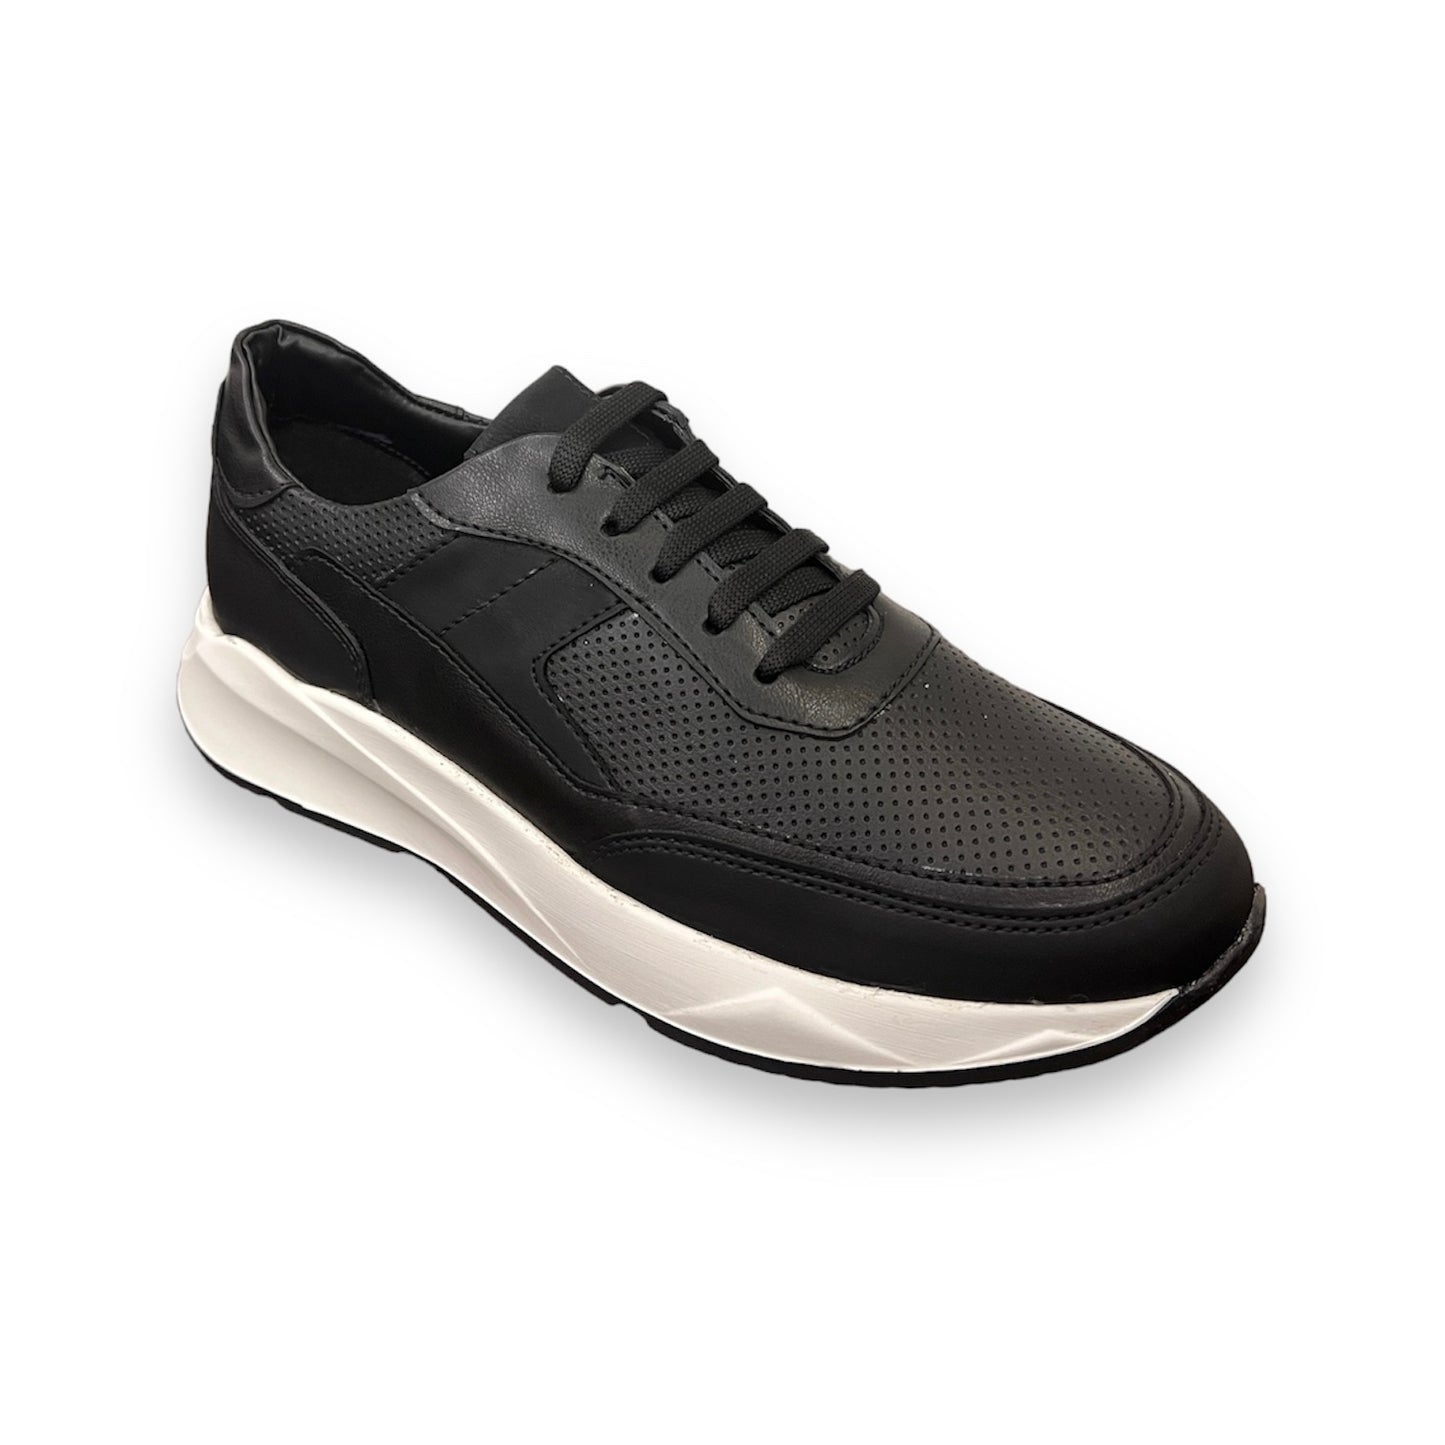 2H #9511 Black/White Casual Shoes